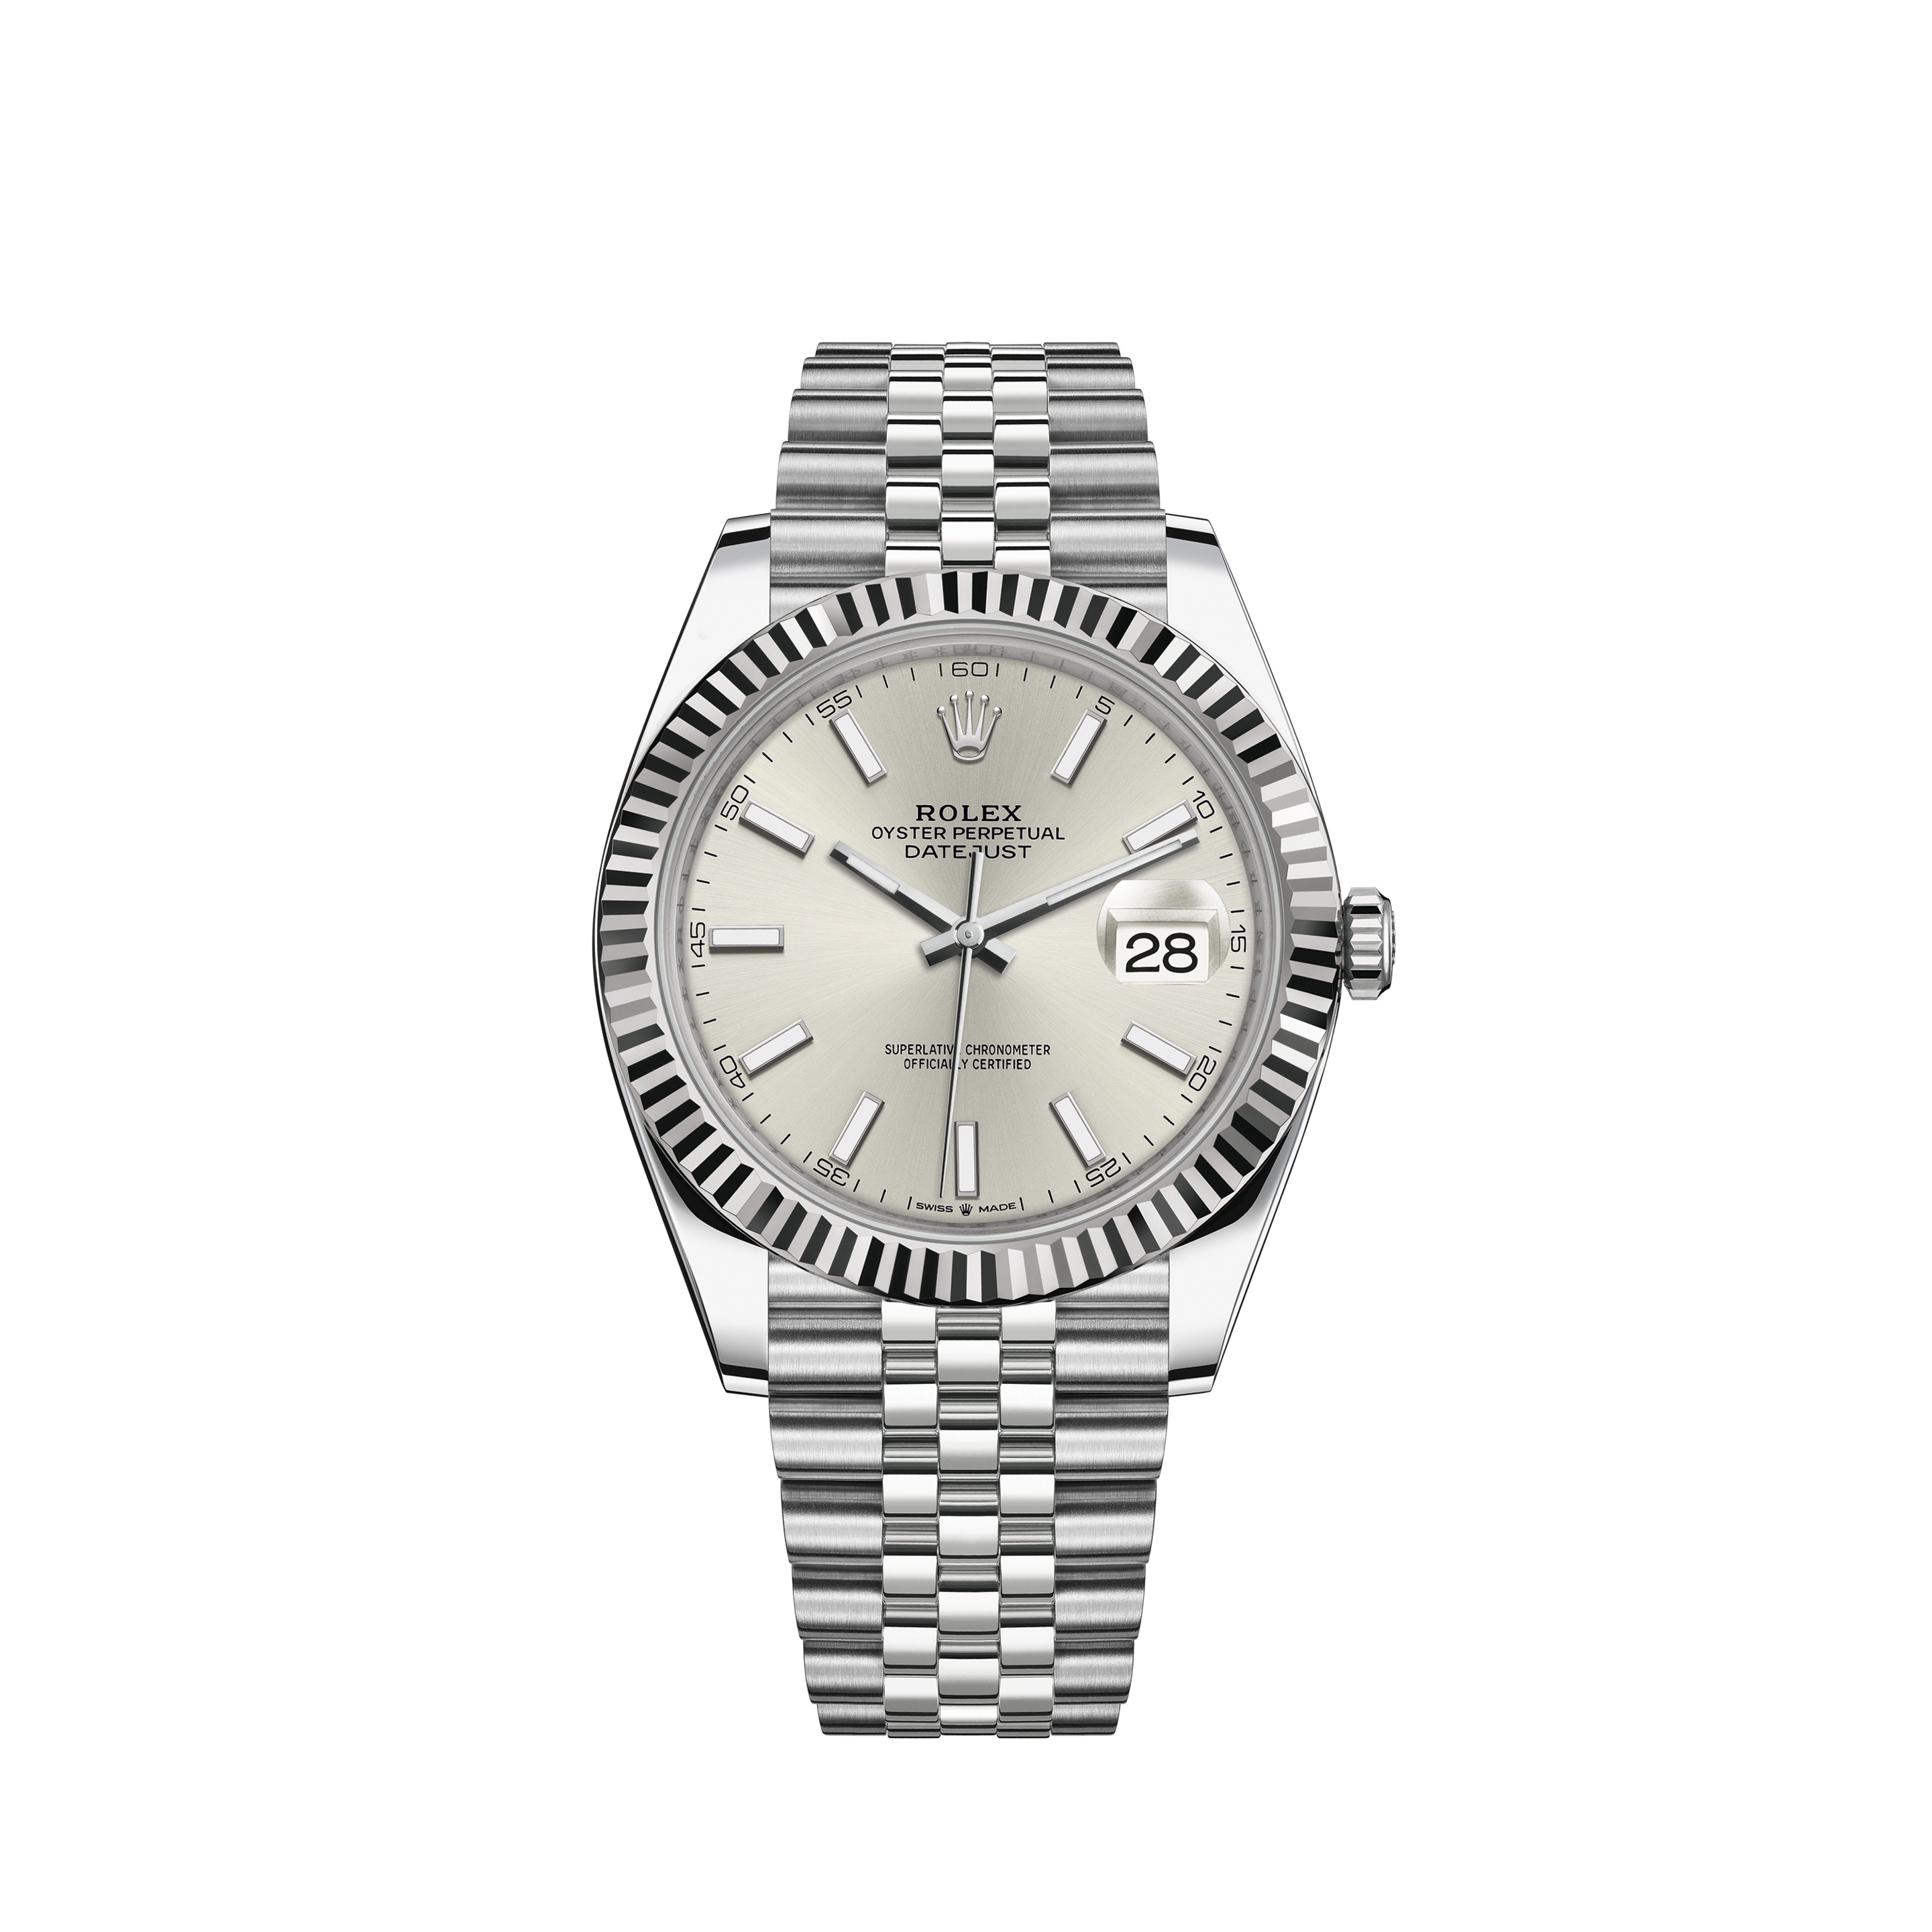 rolex datejust 41mm oyster perpetual